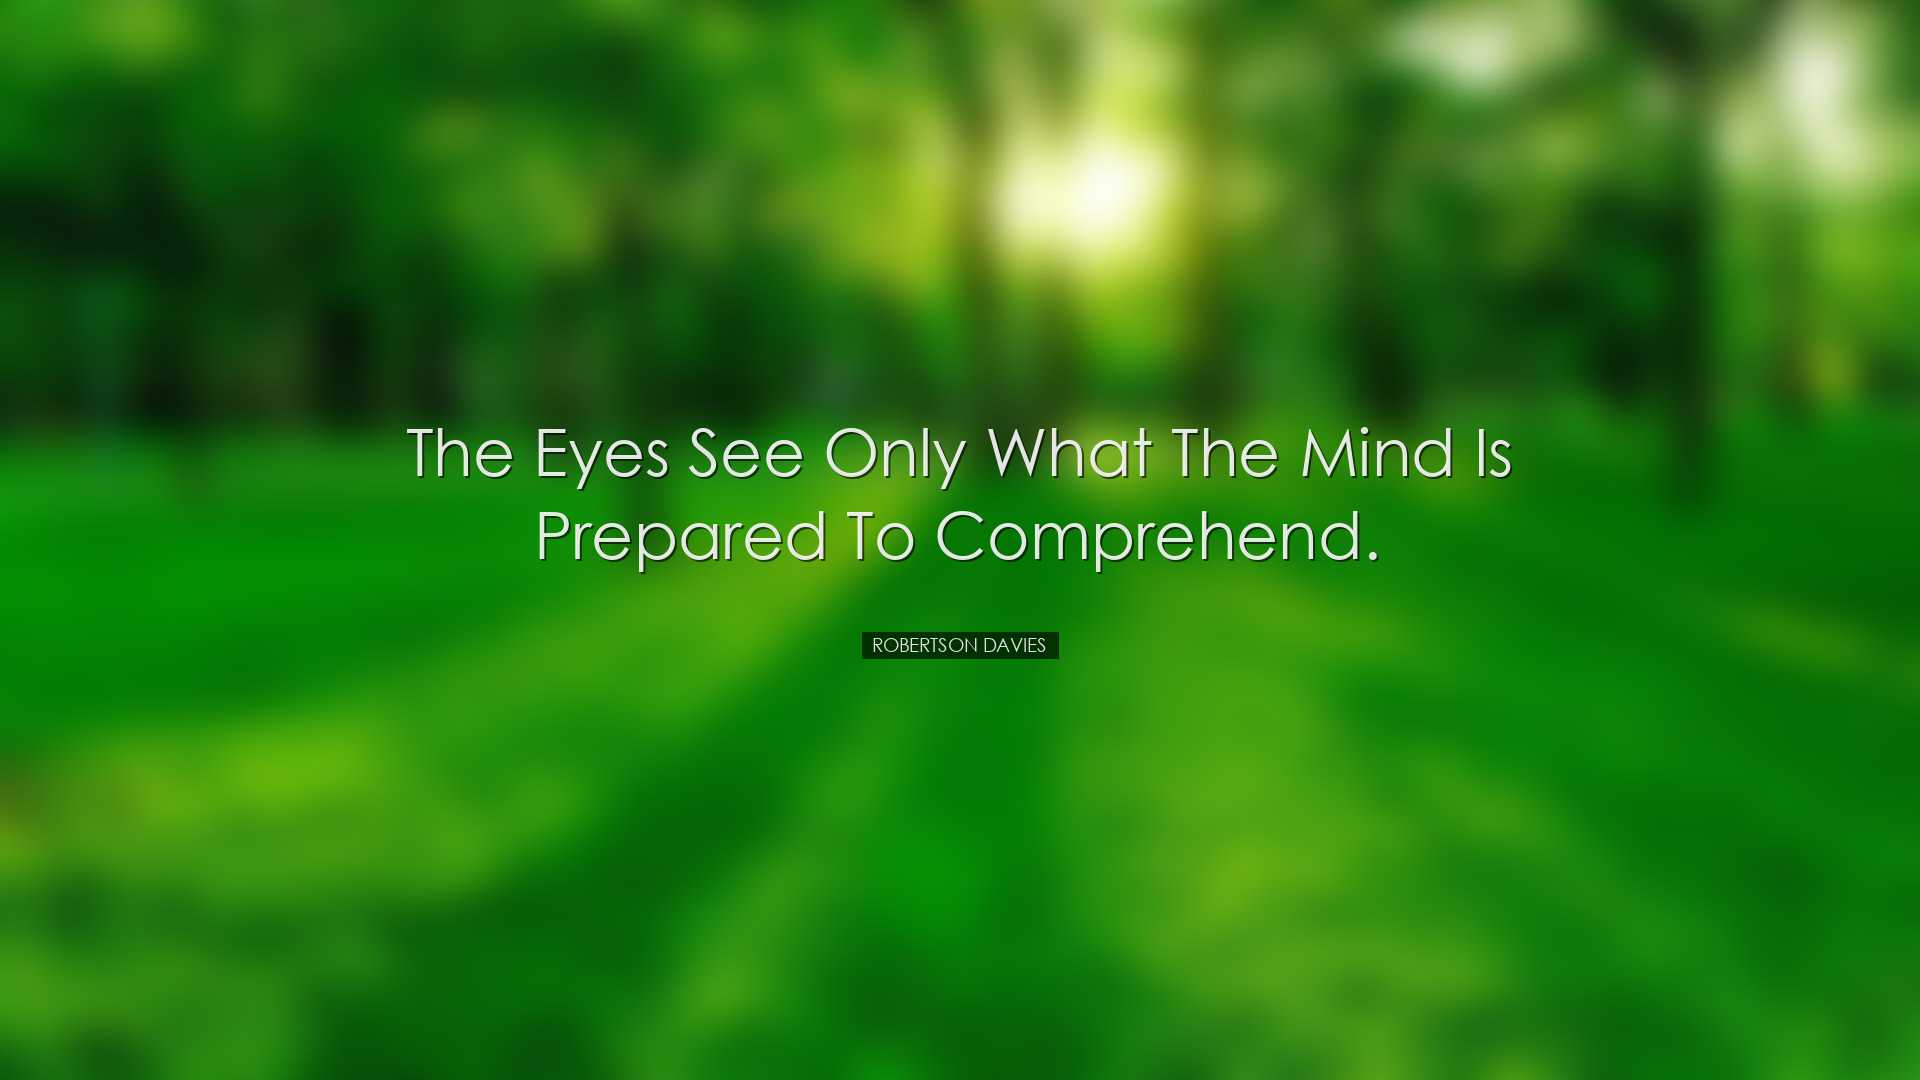 The eyes see only what the mind is prepared to comprehend. - Rober